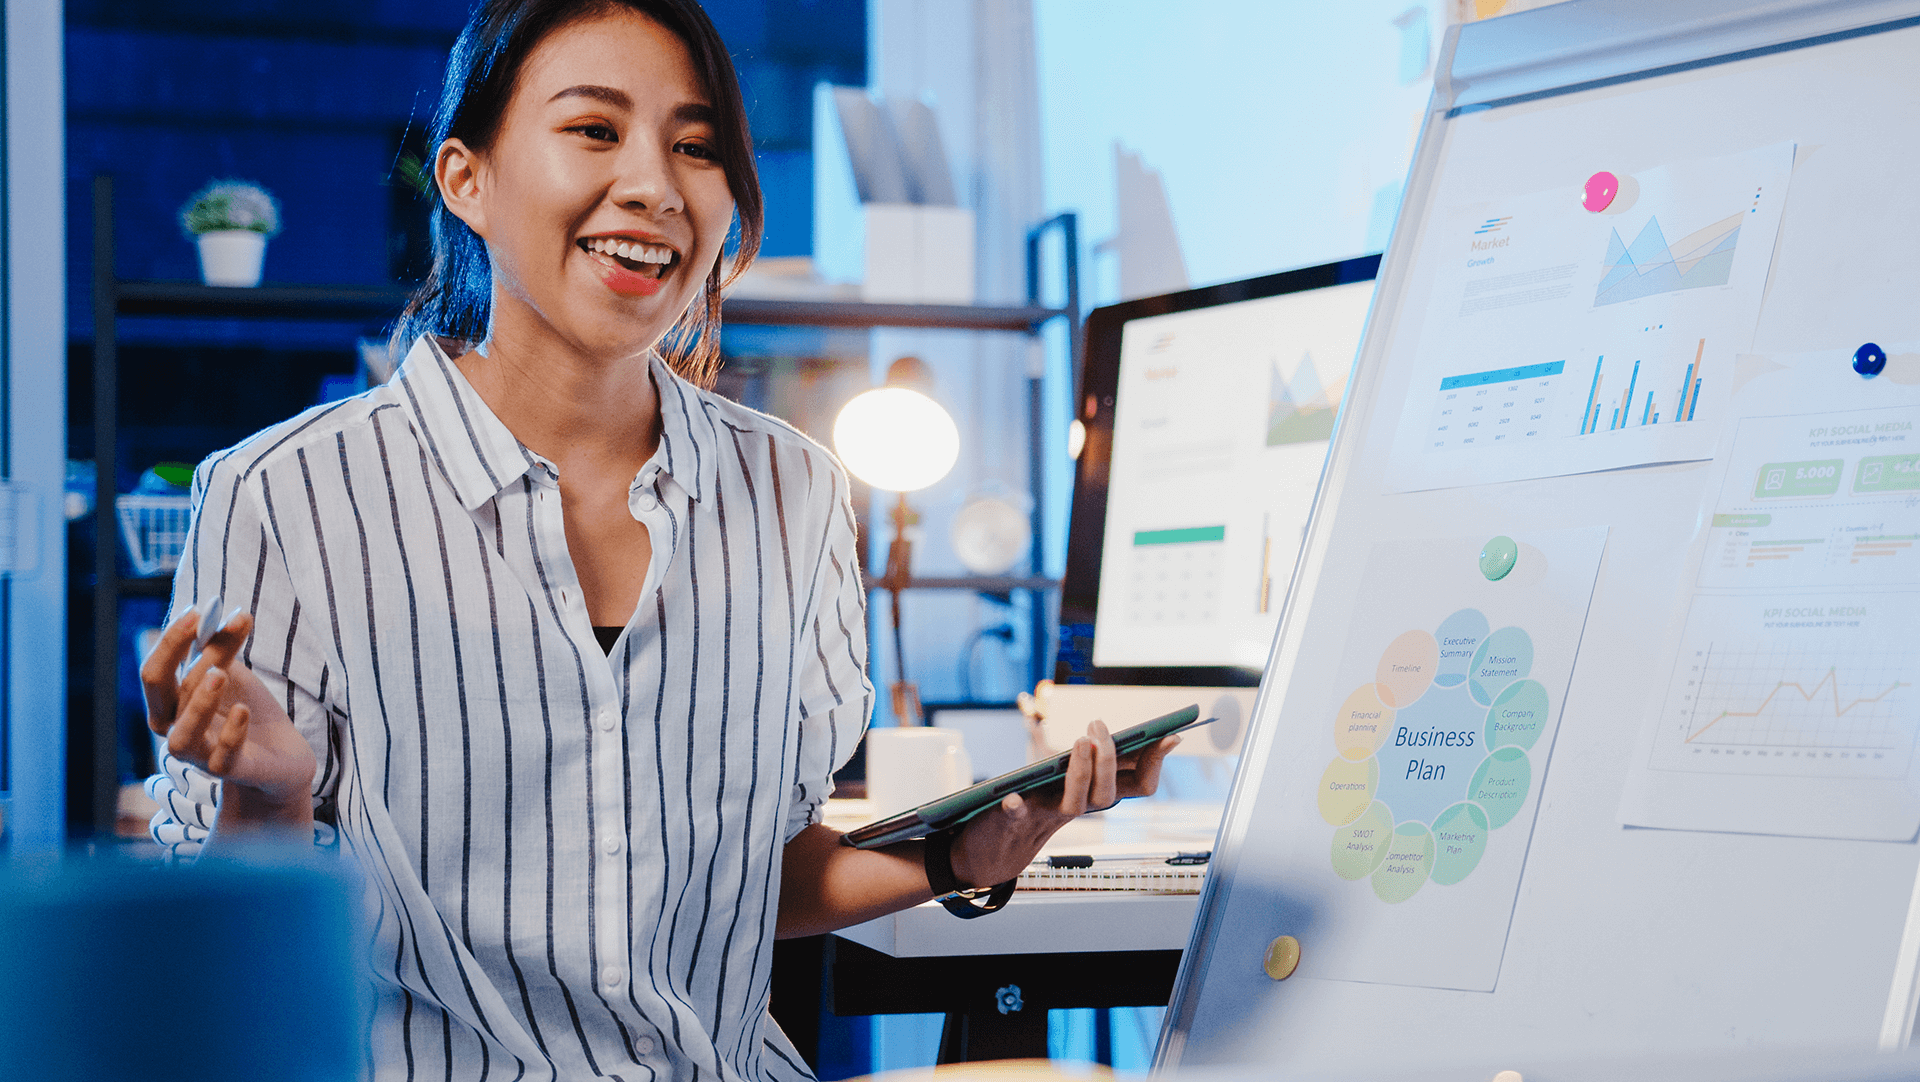 A confident professional woman presenting a business plan with colorful charts and data on a whiteboard in a modern office setting at night.